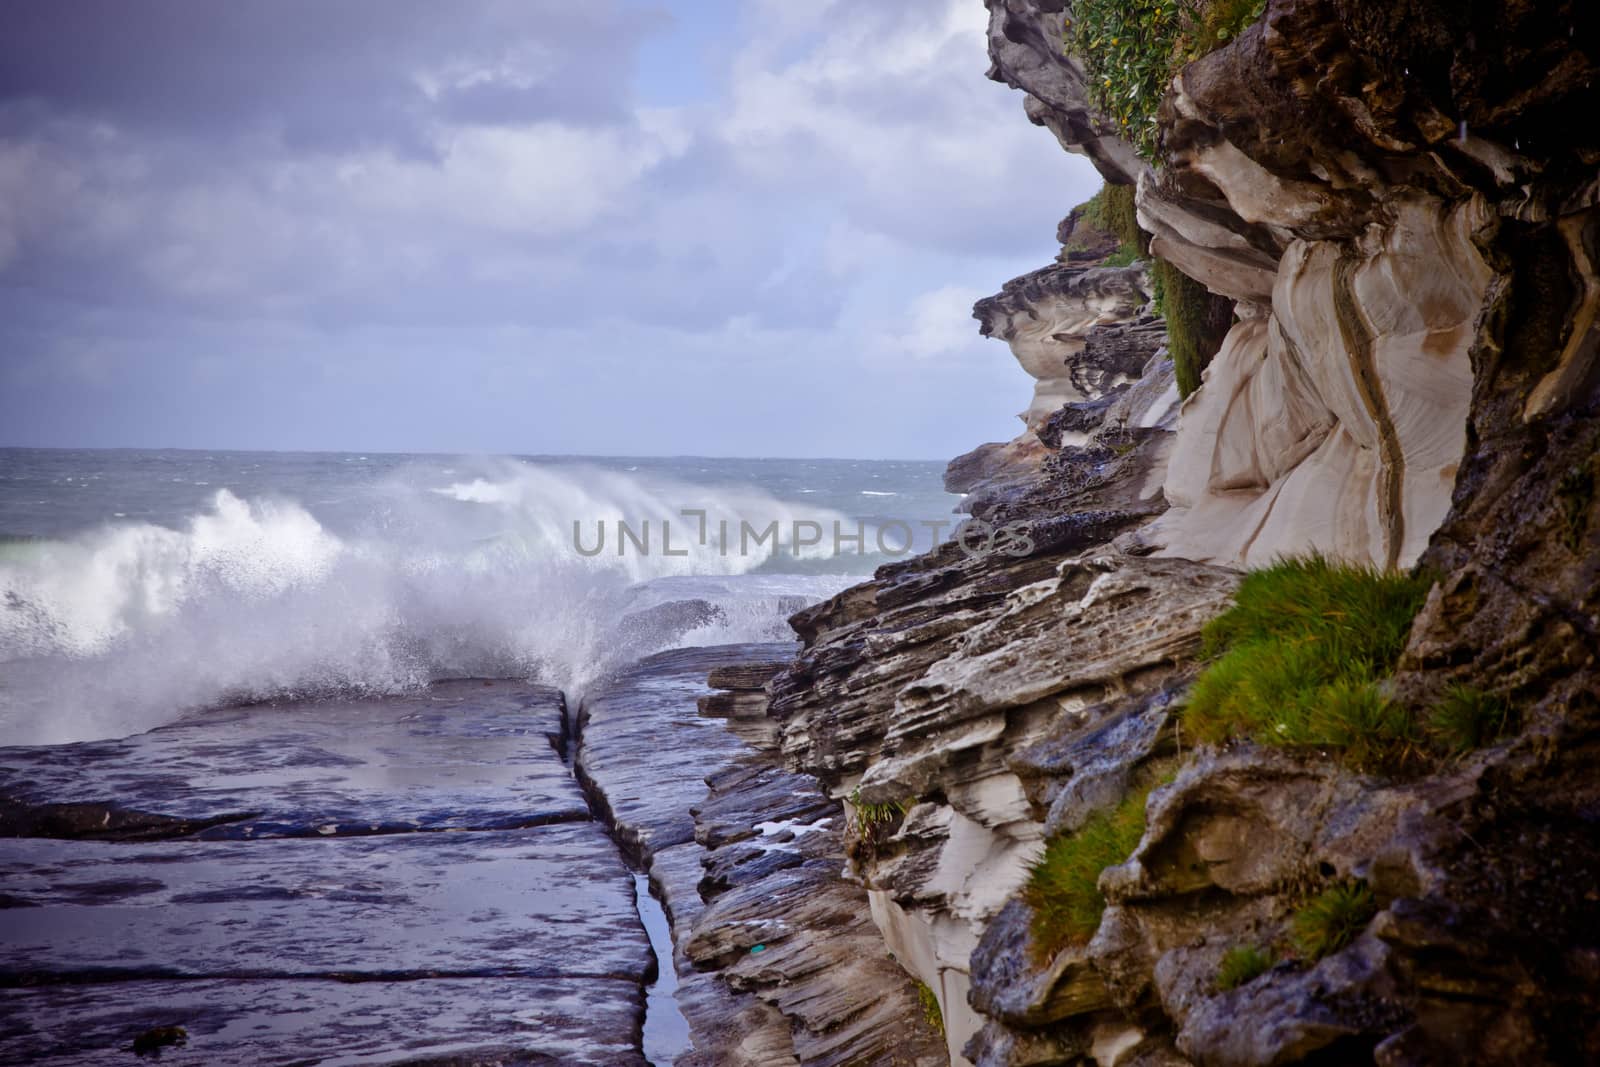 Waves breaking on a wide rocky shelf at the foot of a cliff under a cloudy summer sky